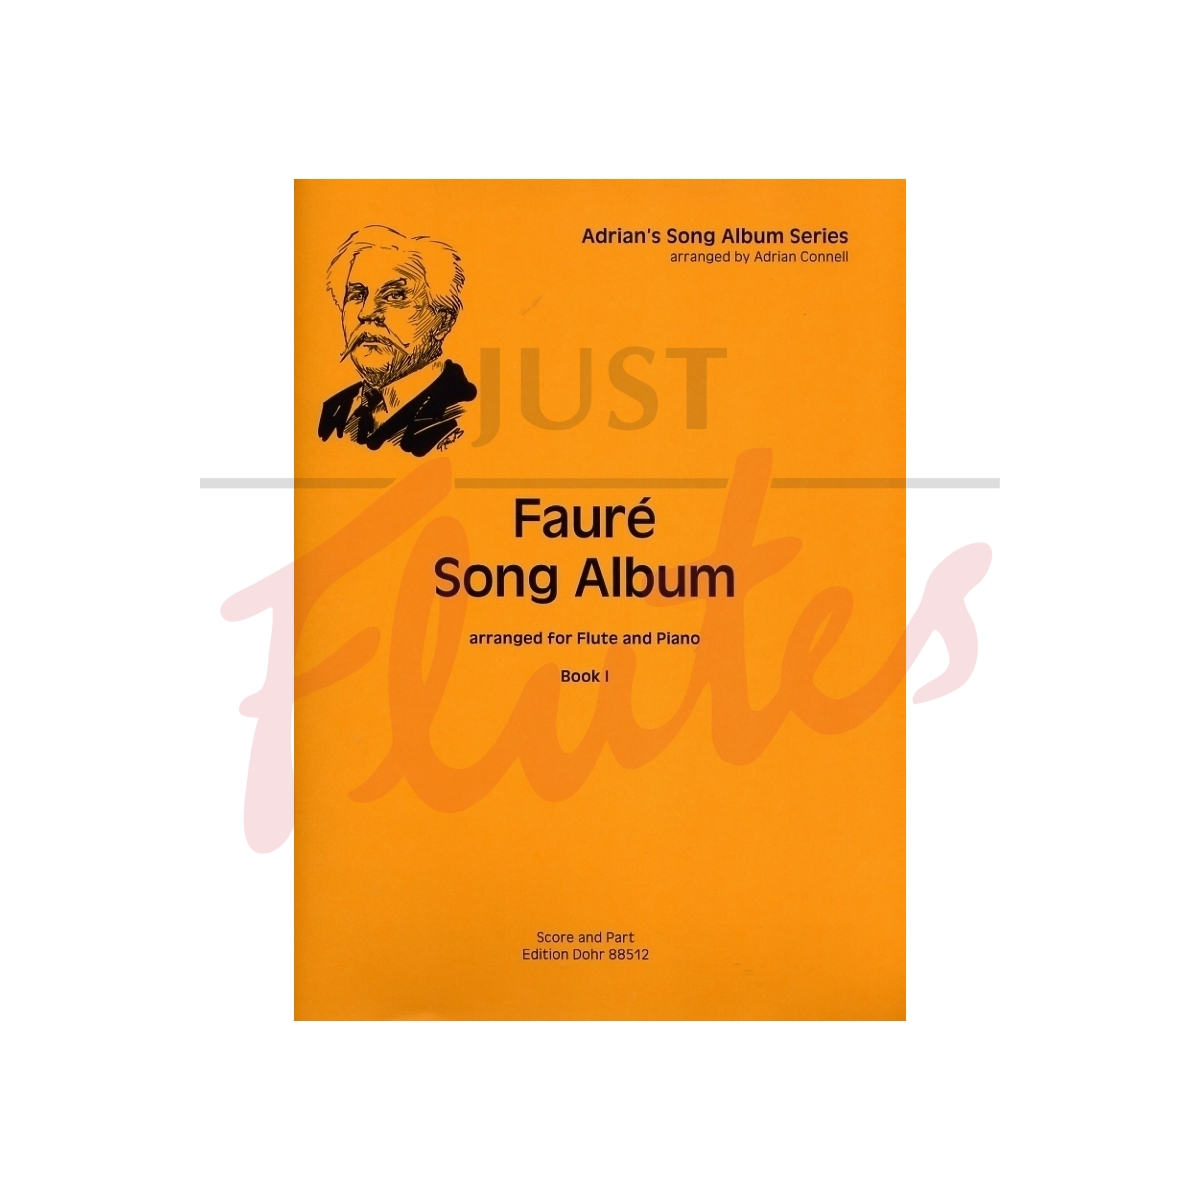 Fauré Song Album Book 1 for Flute and Piano